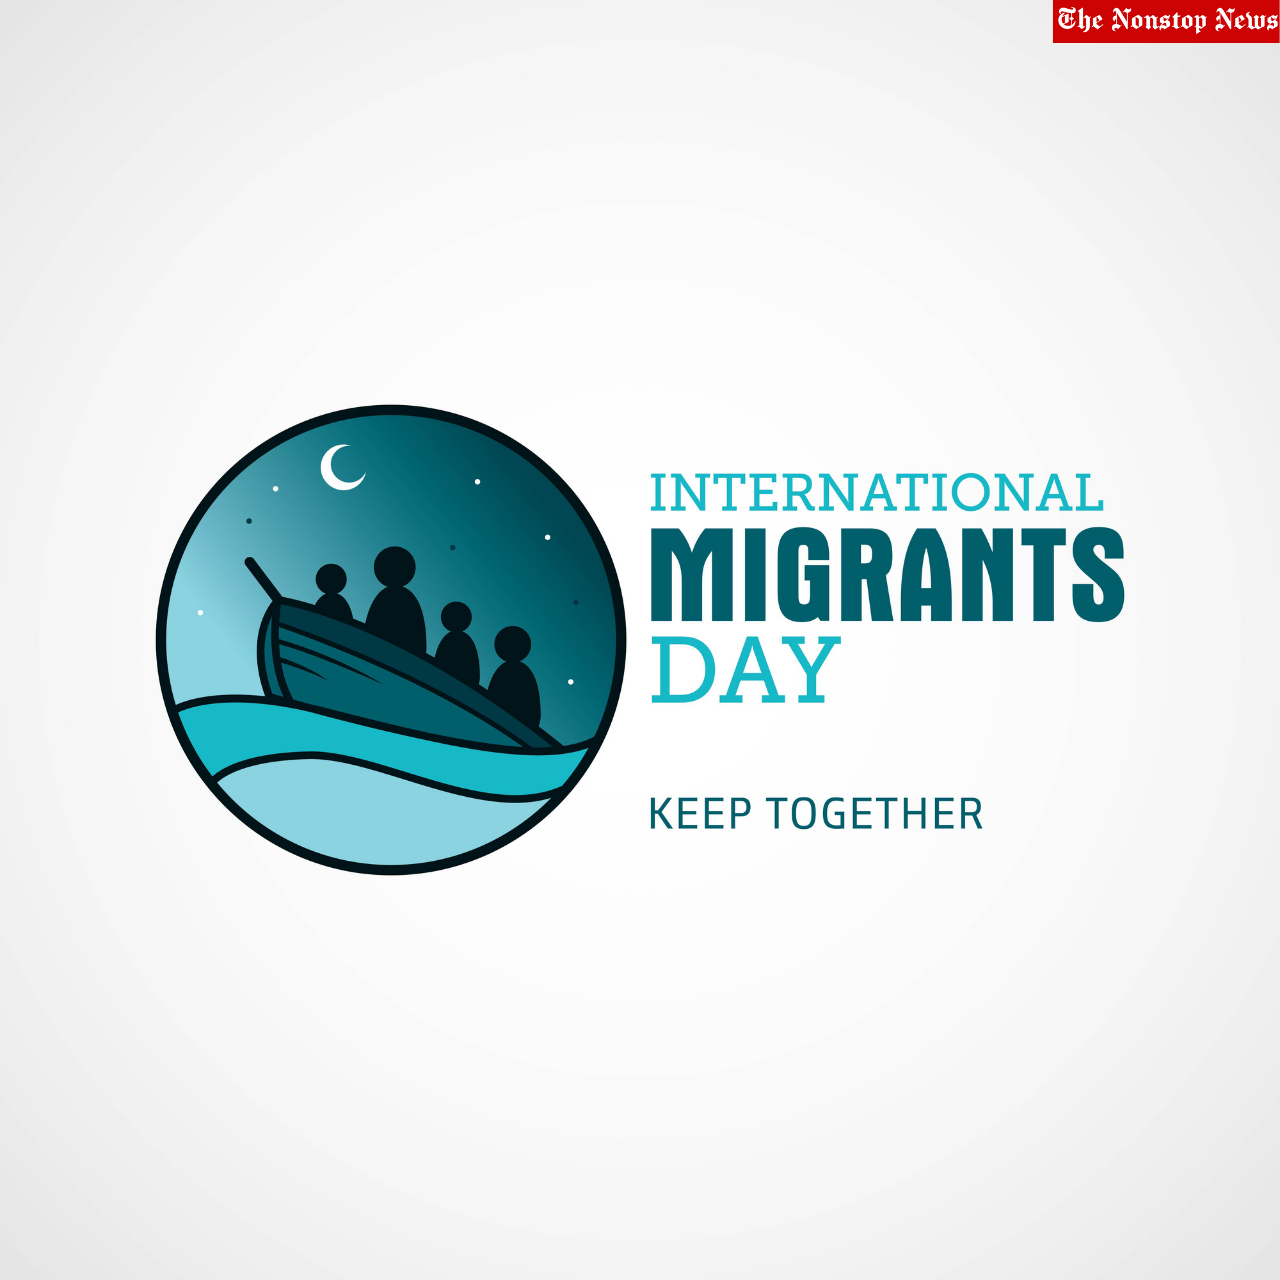 International Migrants Day 2021 Quotes, Wishes, Messages, Images, Posters, and Banners to create awareness